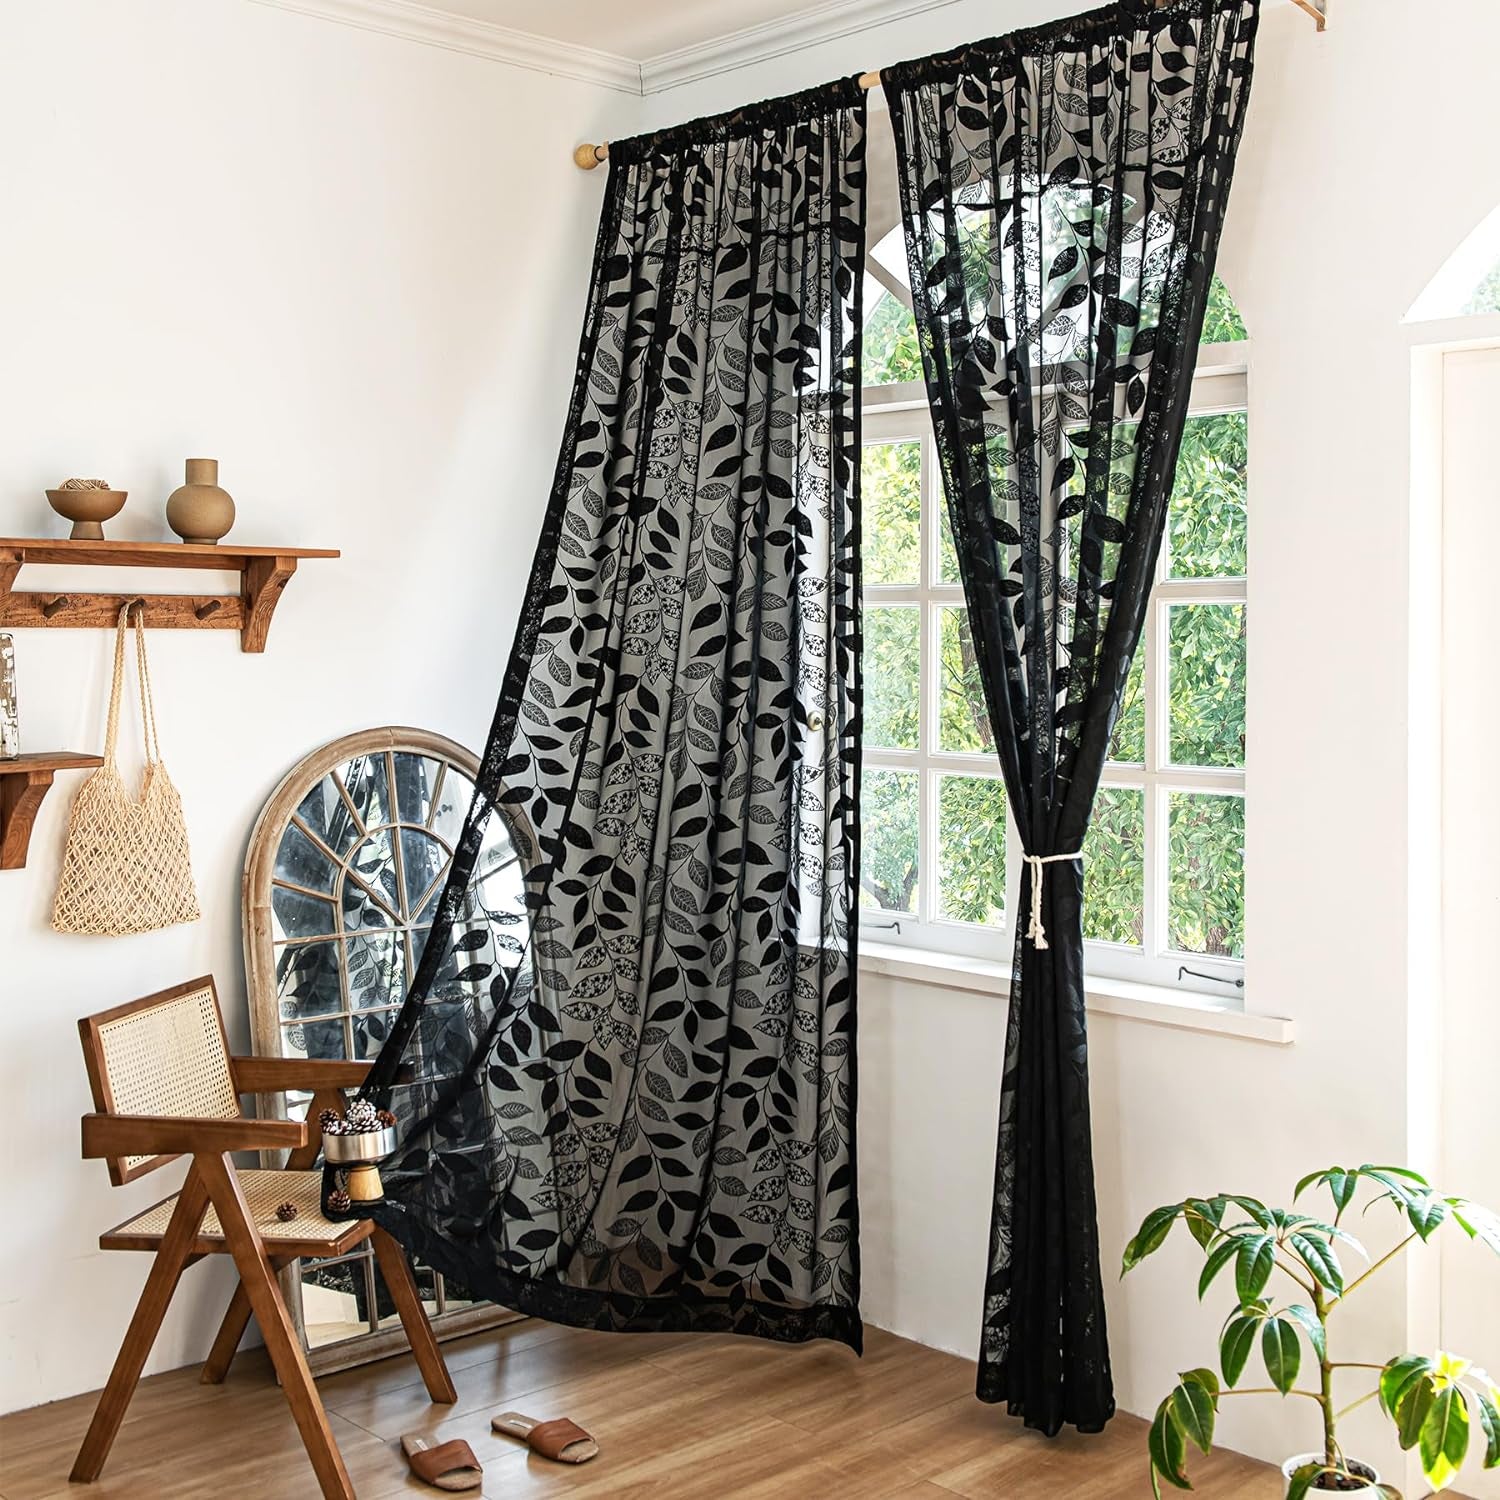 Treatmentex Black Sheer Lace Curtains for Bedroom Living Room Studio 84Inch Long Vintage Rose Floral Embroidered Semi Sheer Curtain Panels Privacy Leaf Sheer Drapes with Scalloped Edge 54" W 2Pcs 7Ft  Treatmentex Leaf - Black 52"W X 63"L 2Pcs 